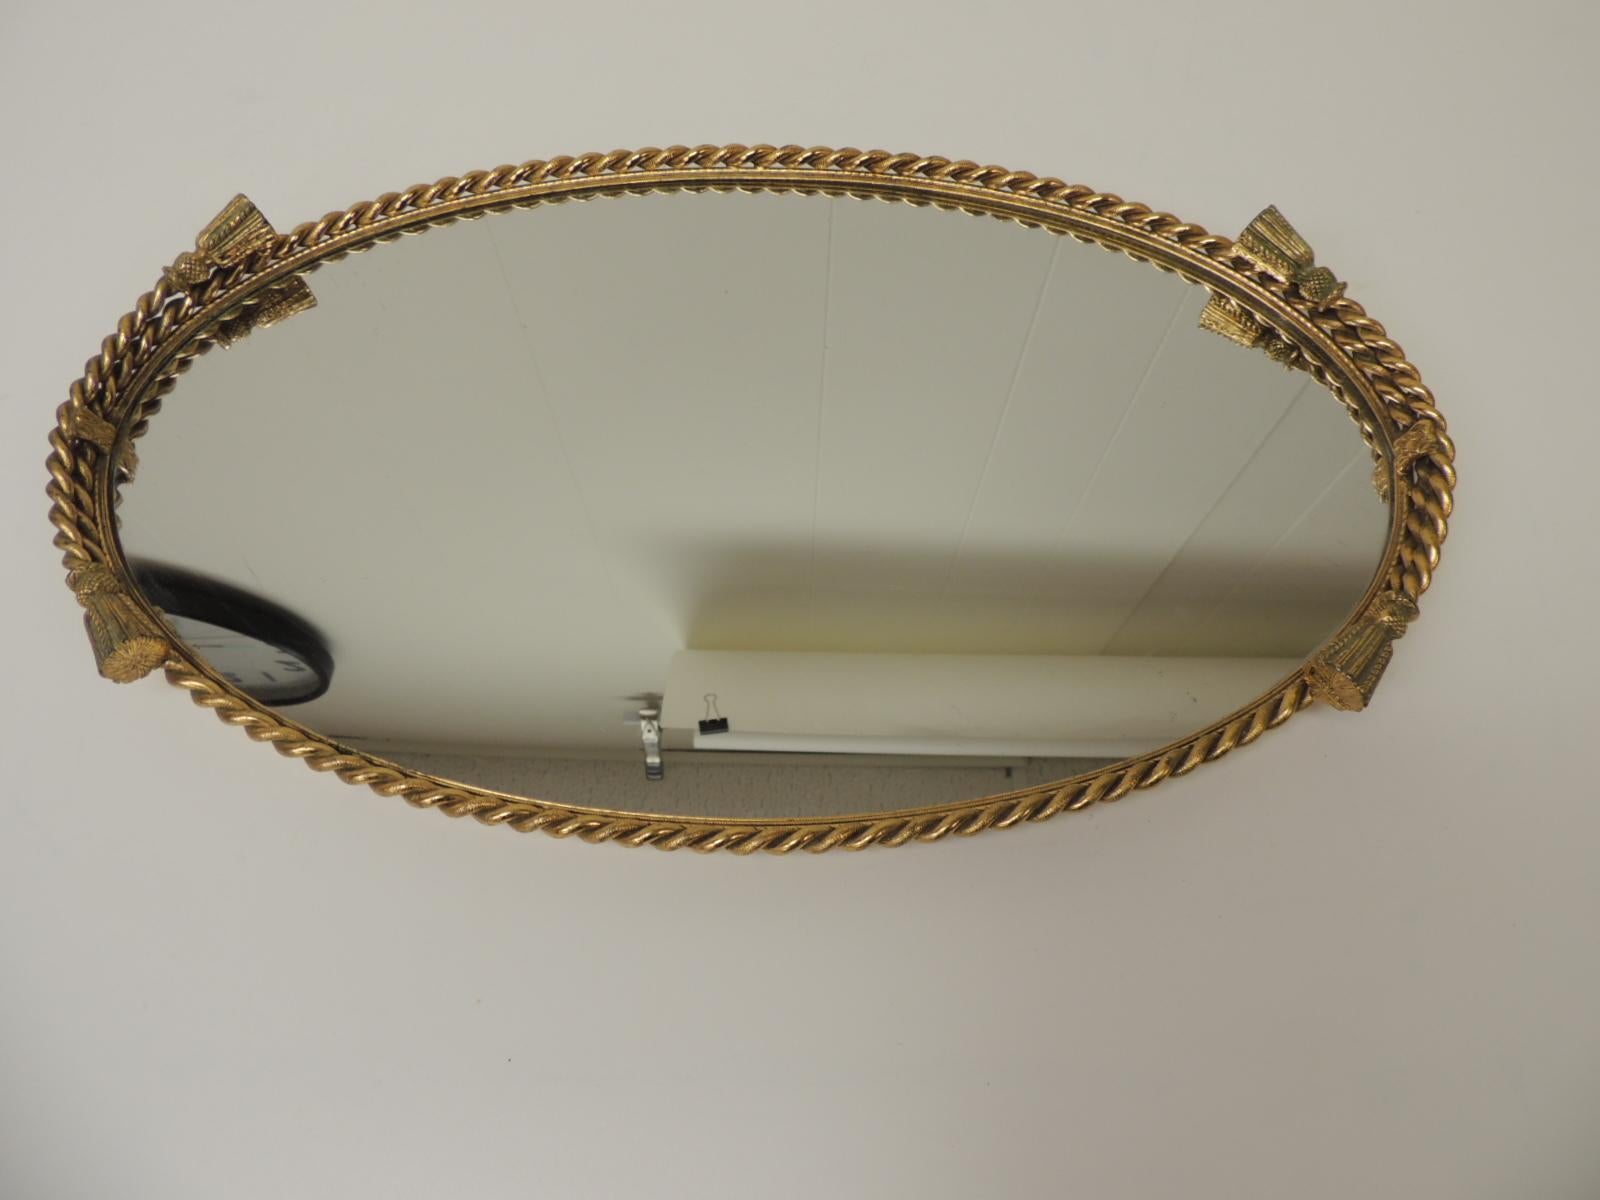 Art Deco Vintage French Rope and Tassels Large Oval Brass Vanity Tray with Mirror